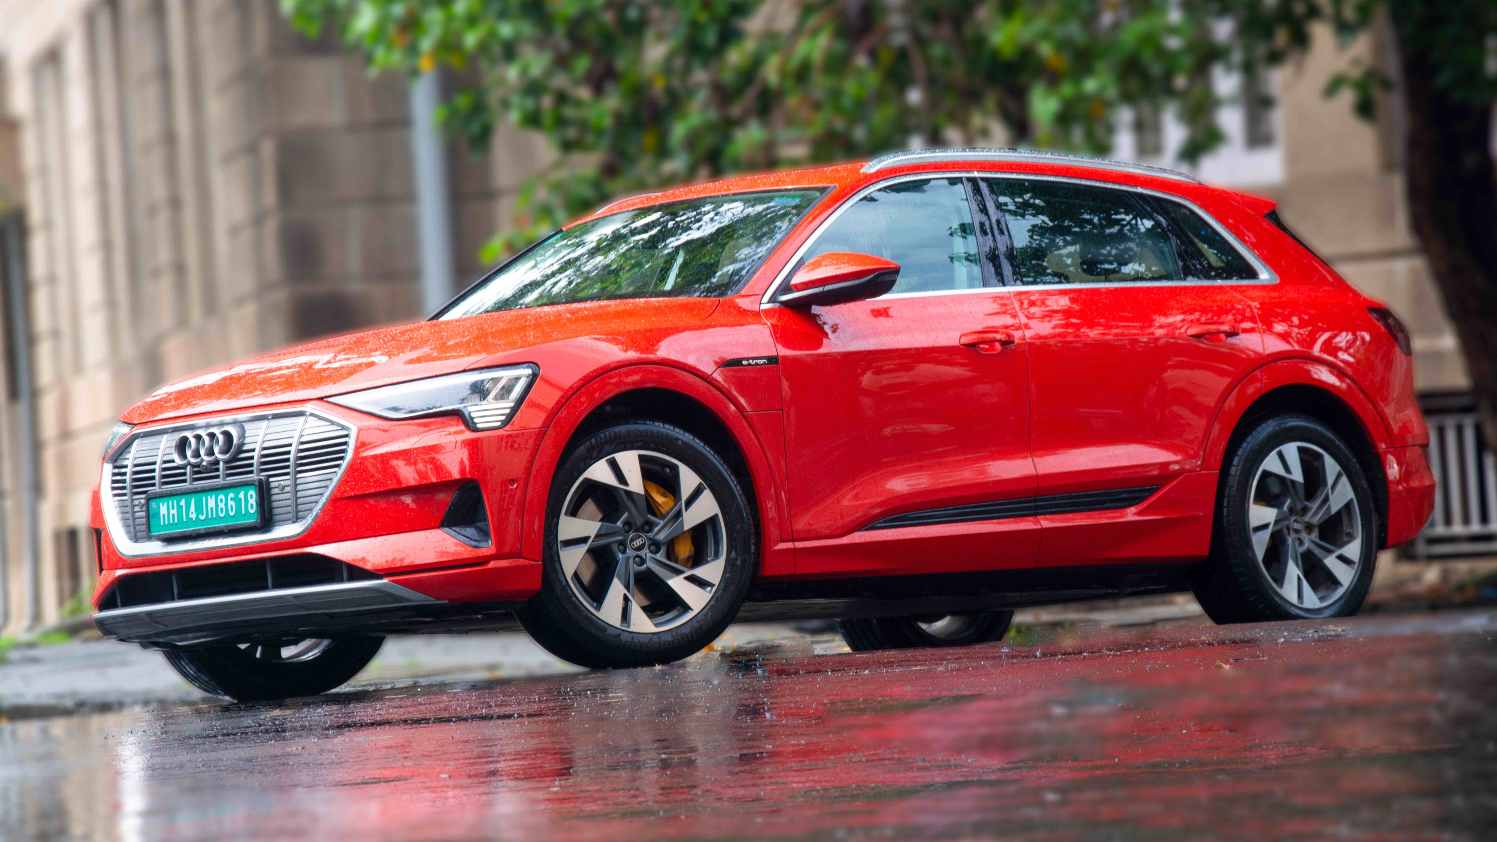 Audi e-tron owners will be able to use charging facilities at Audi's dealerships for free for the remainder of 2021. Image: Audi India